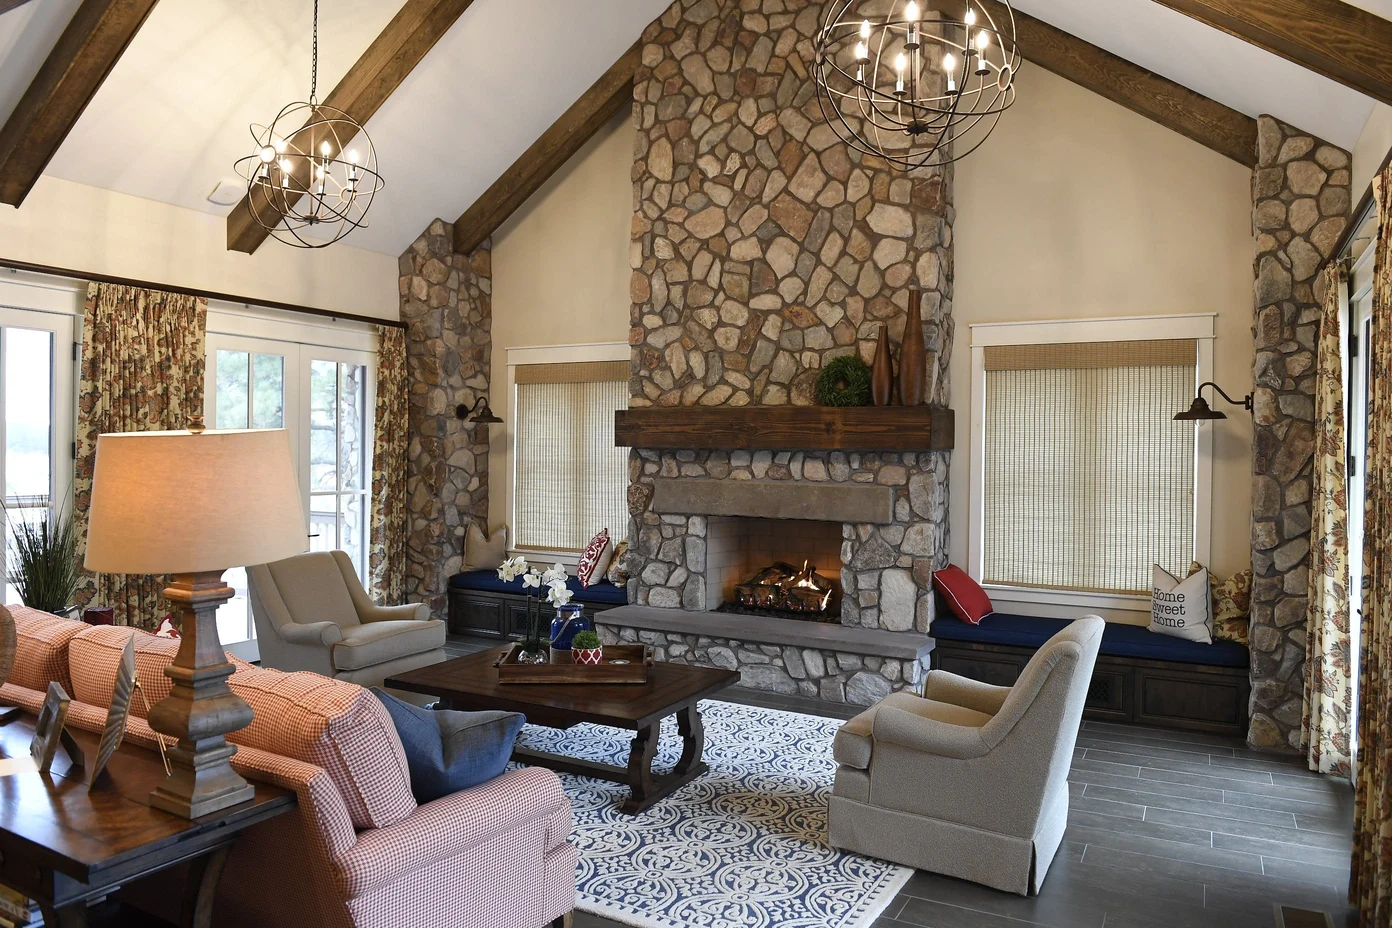 interior view of SIP home shows large stone fireplace with crackling fire, high pitched ceiling with wooden beams, cosy furnishings and windows on both sides; unique metal chandeliers and sconces - photo